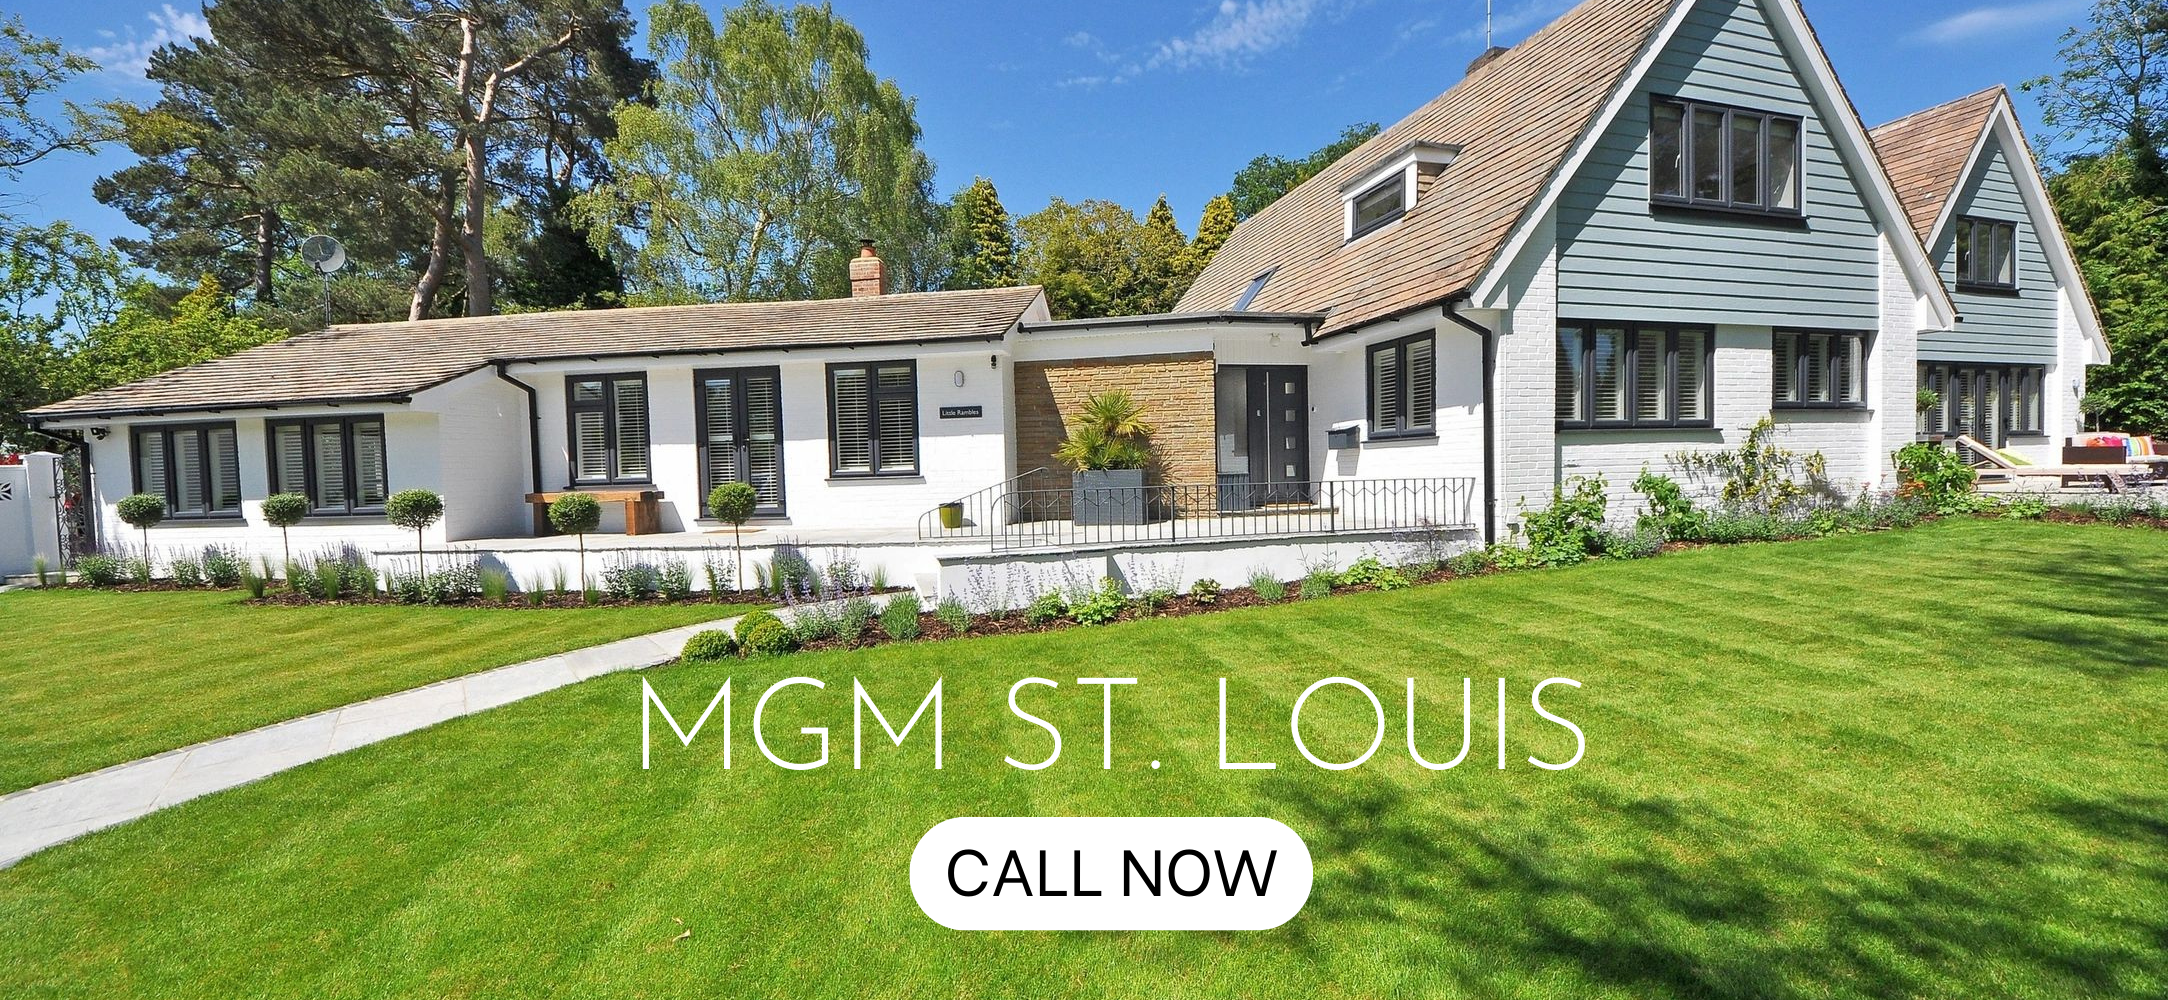 MGM St Louis Home